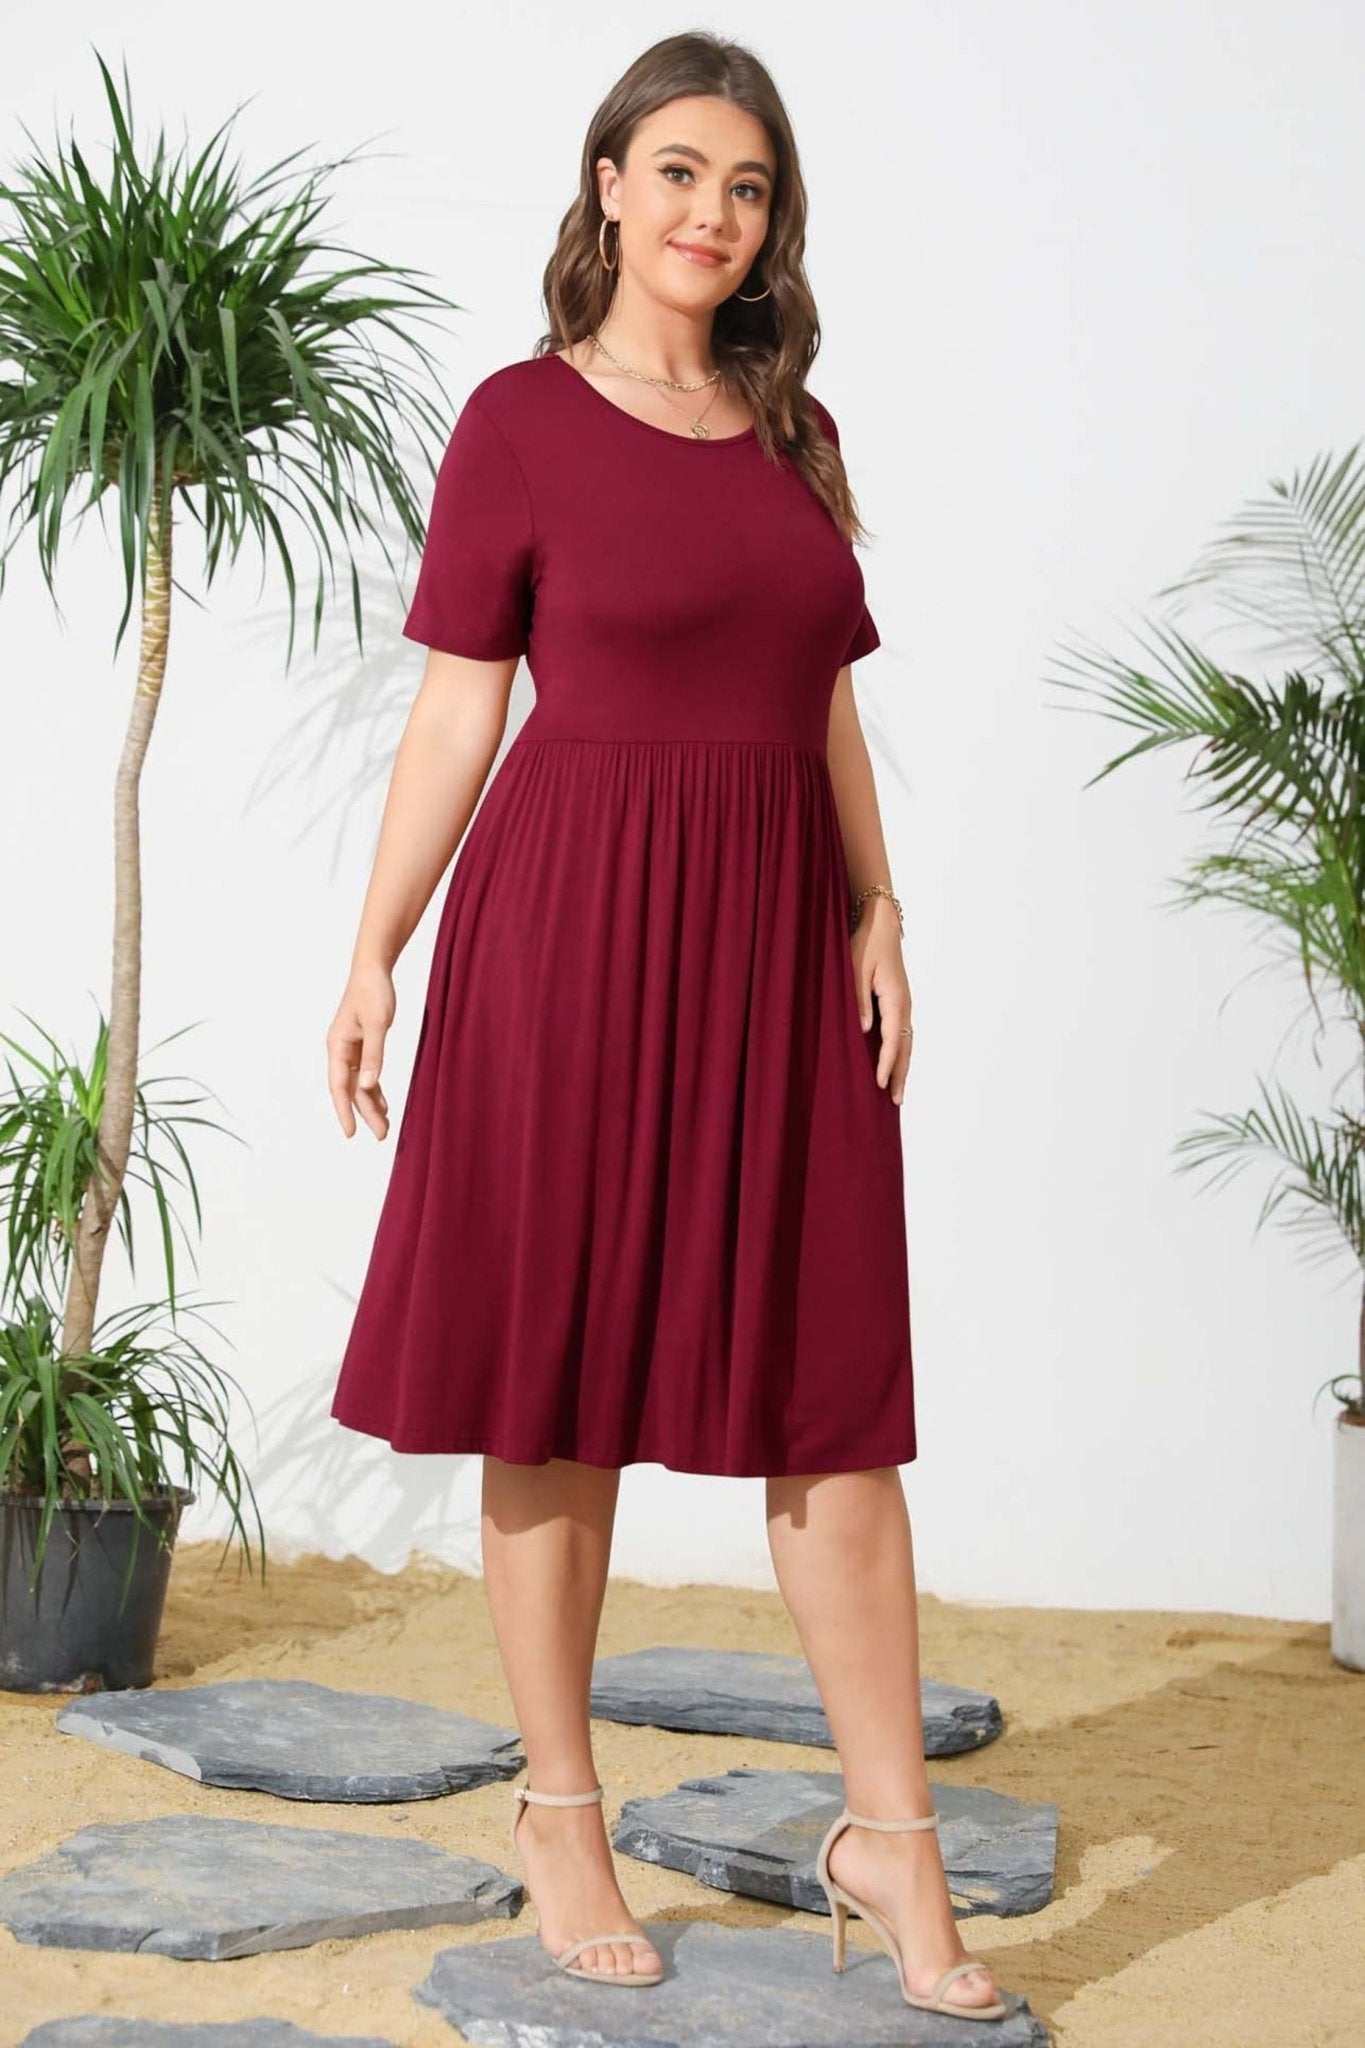 Minimalist Casual Midi Dress with Pockets, White/Green/Wine Red - POSESHE